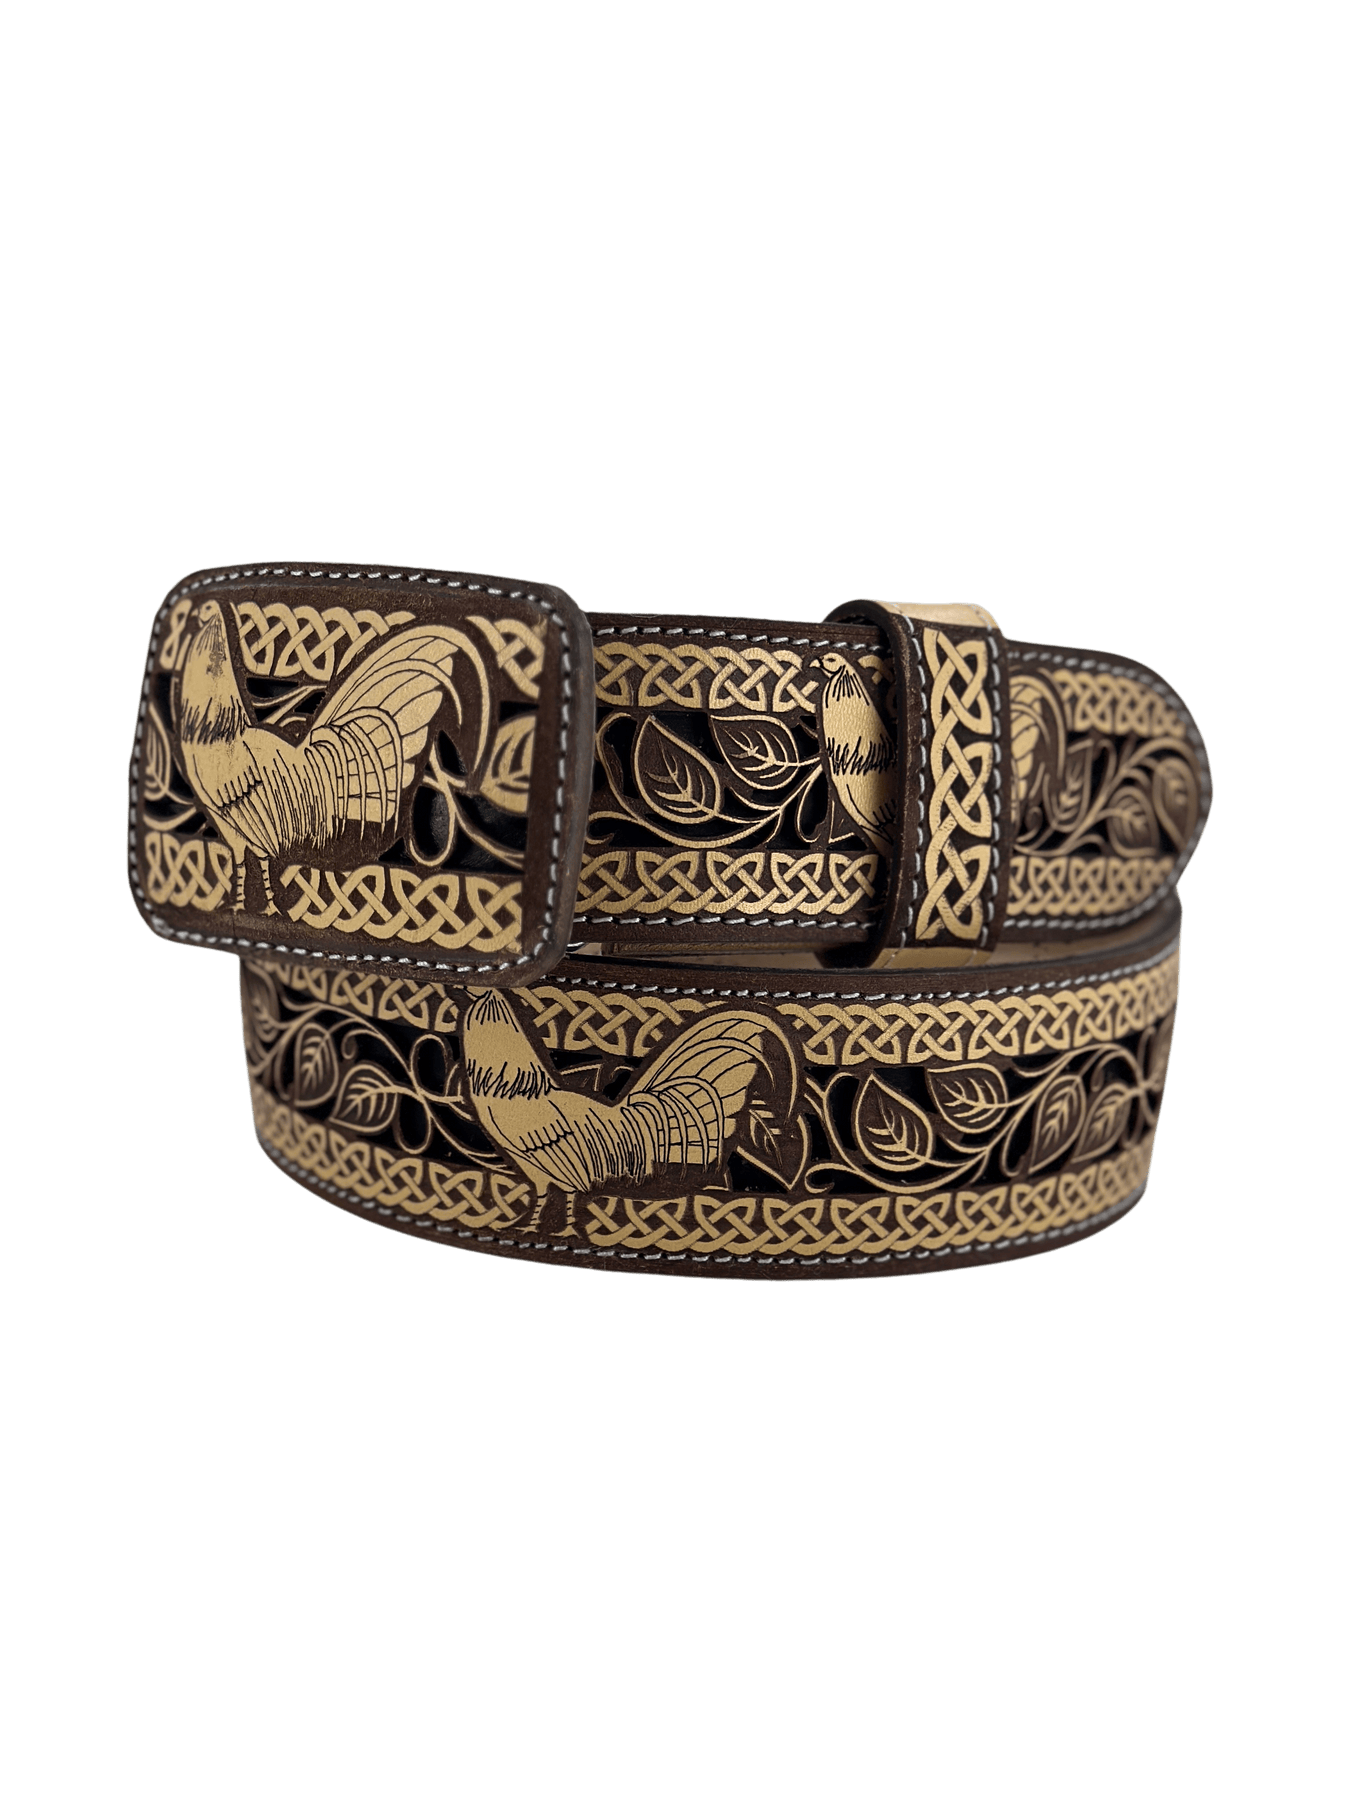 Chiselled Charro Leather Belts / Cintos Charros Cincelados